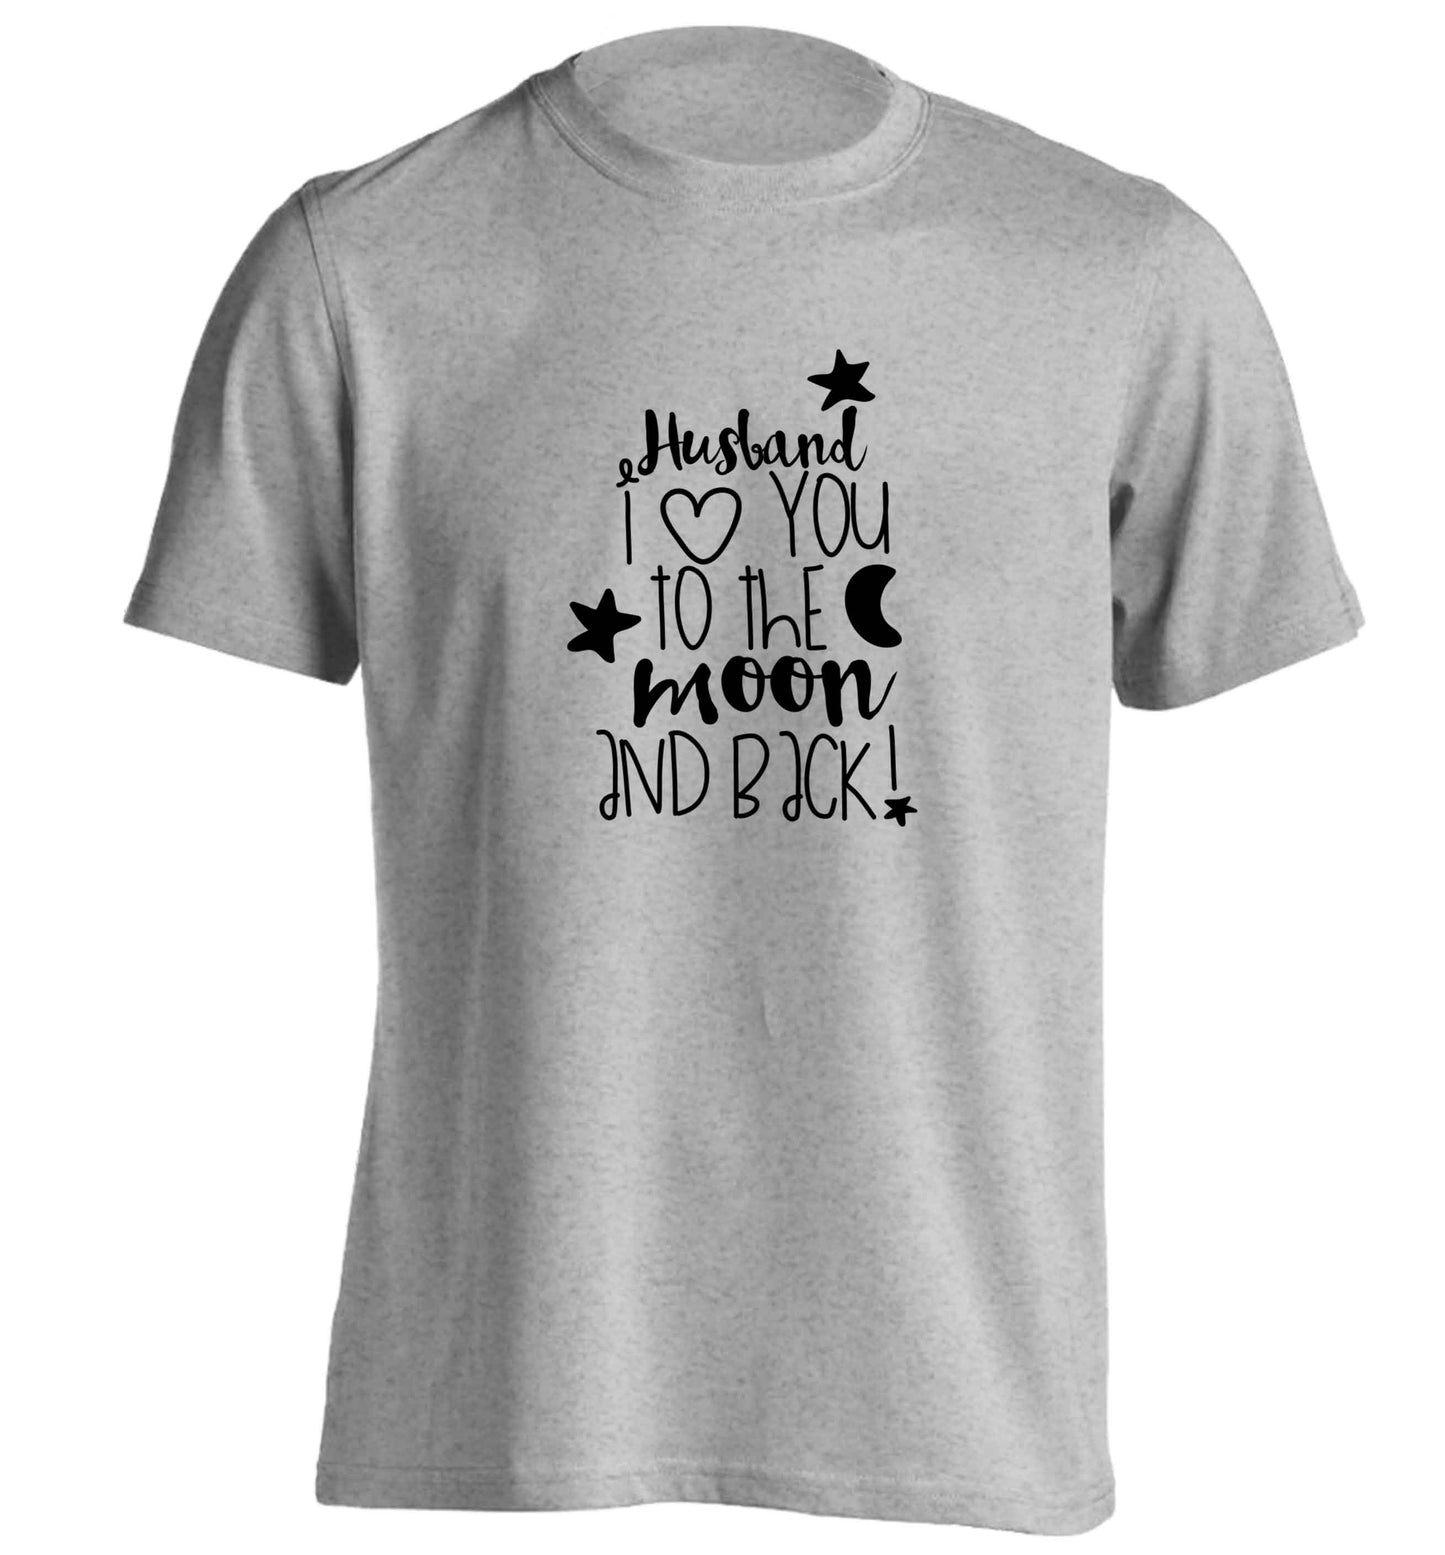 Husband I love you to the moon and back adults unisex grey Tshirt 2XL